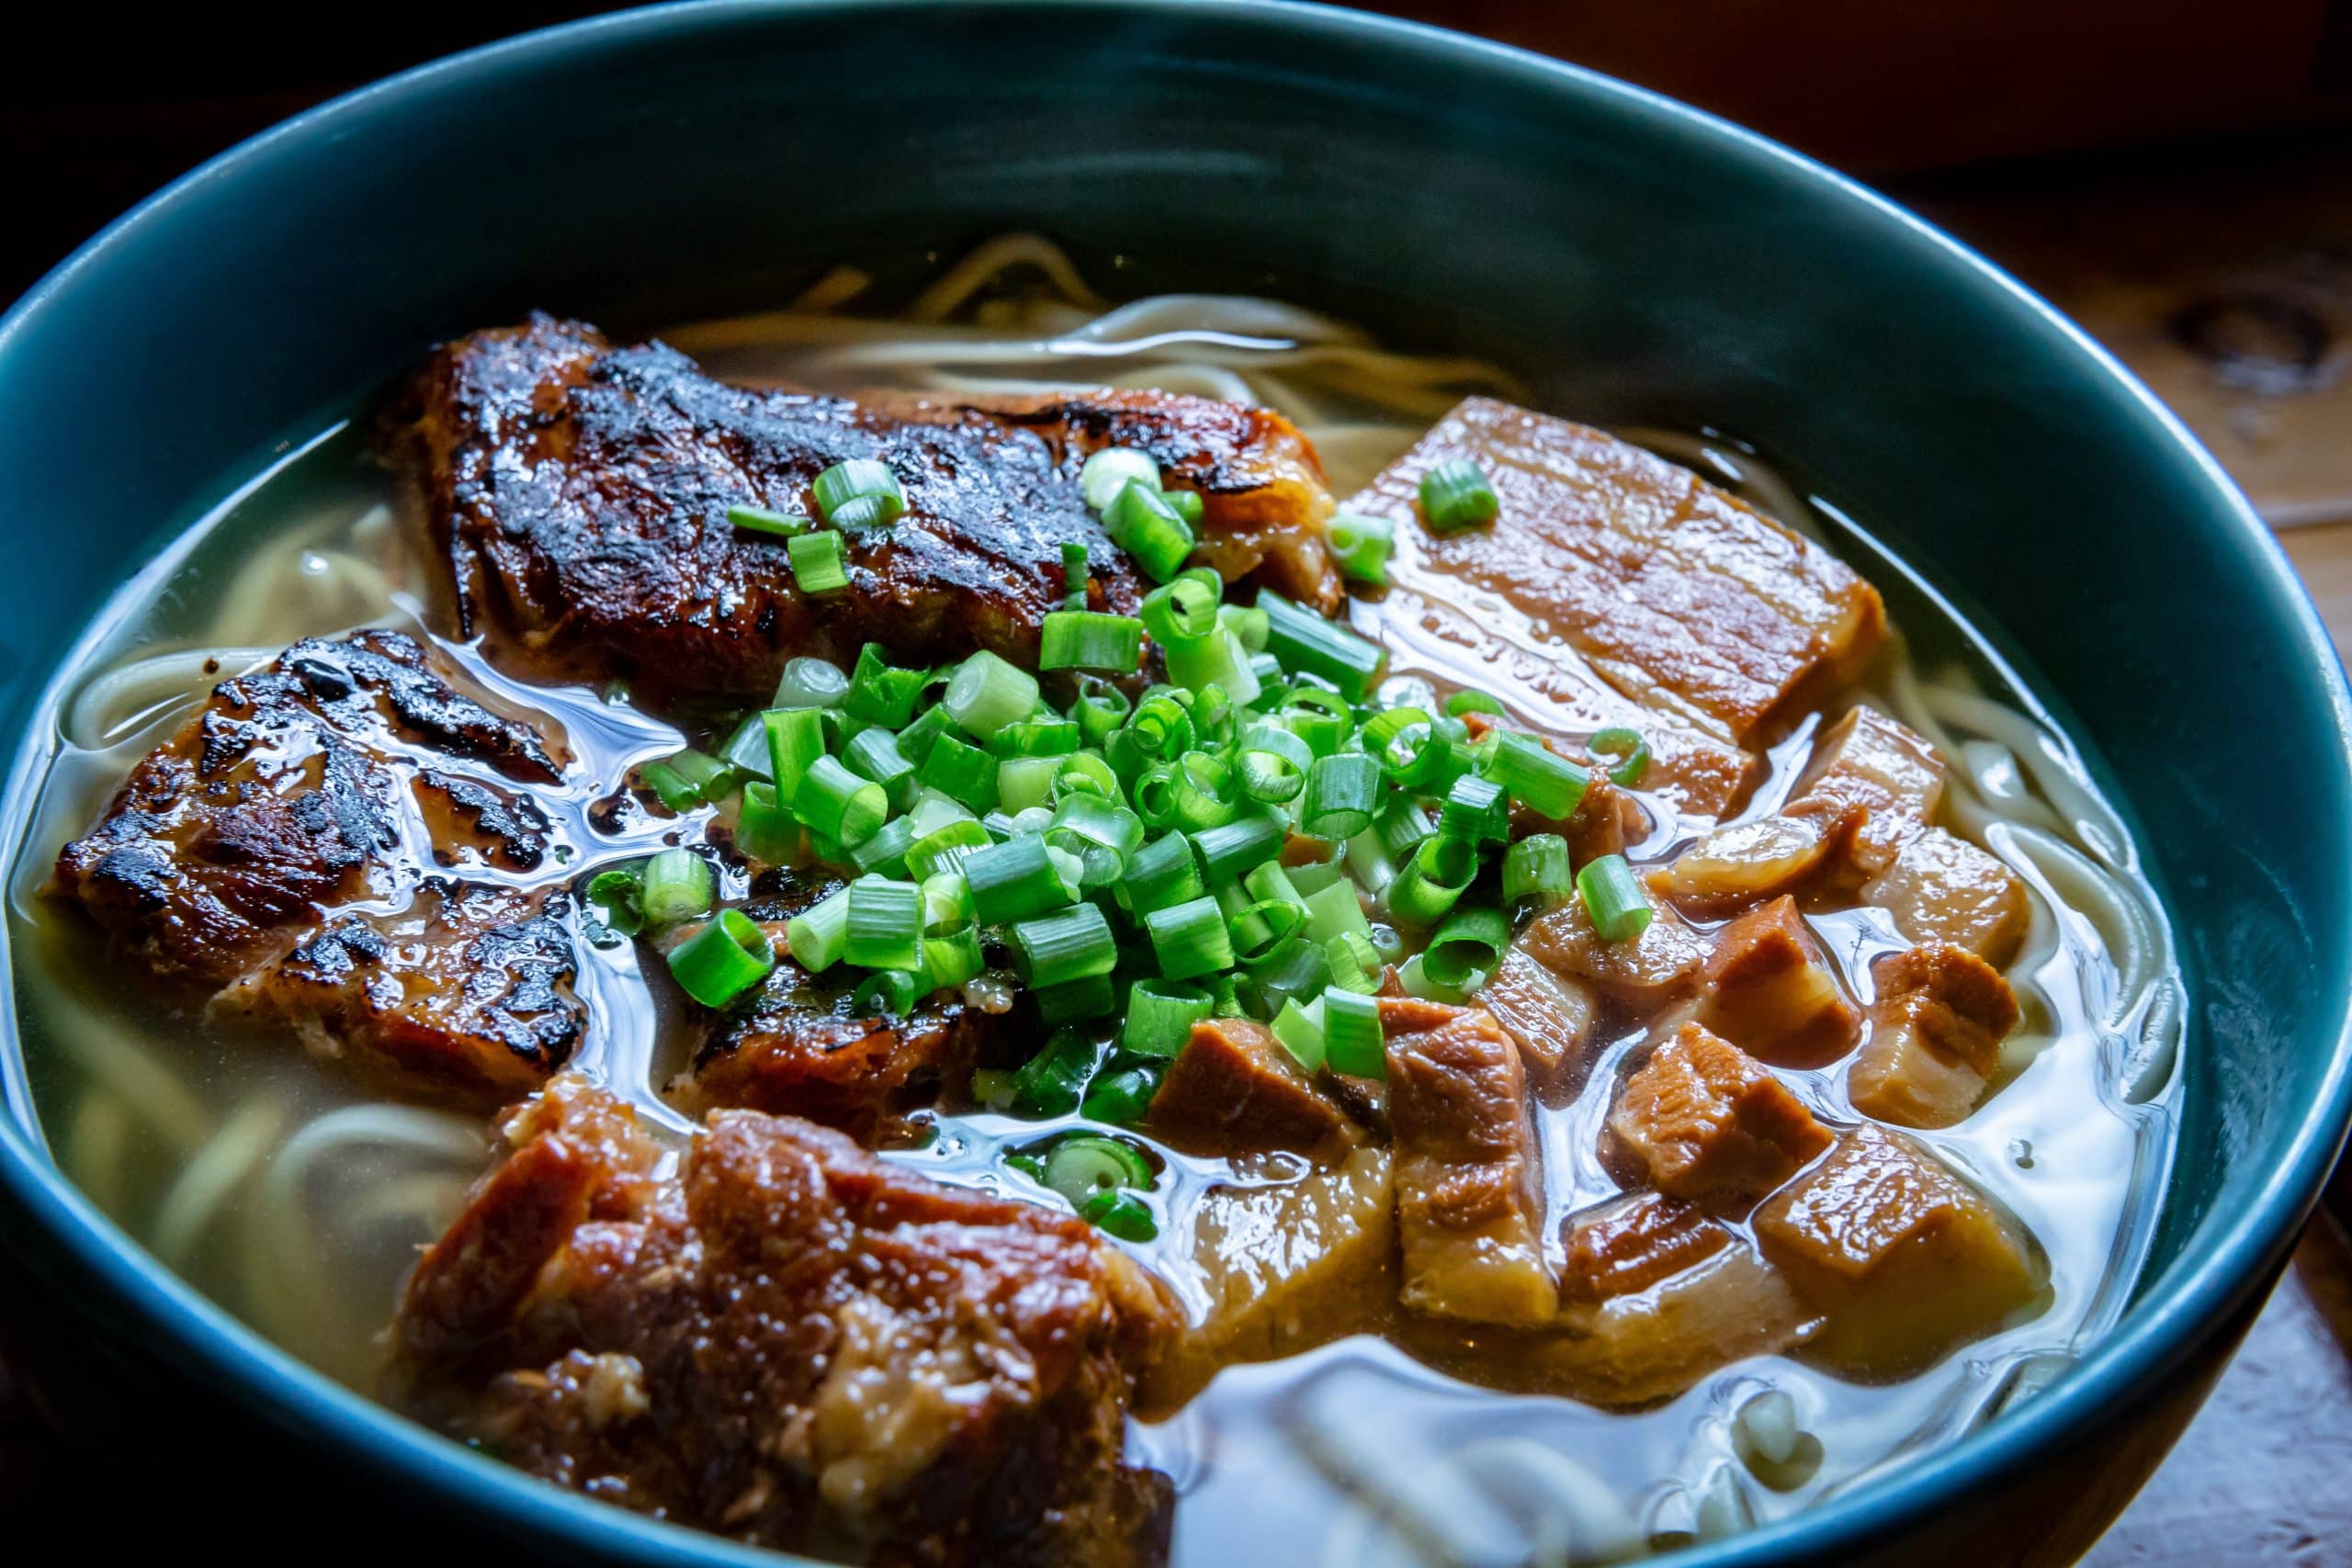 Very attractive bowl of Japanese food showing noodles, pork, broth and topped with green onions